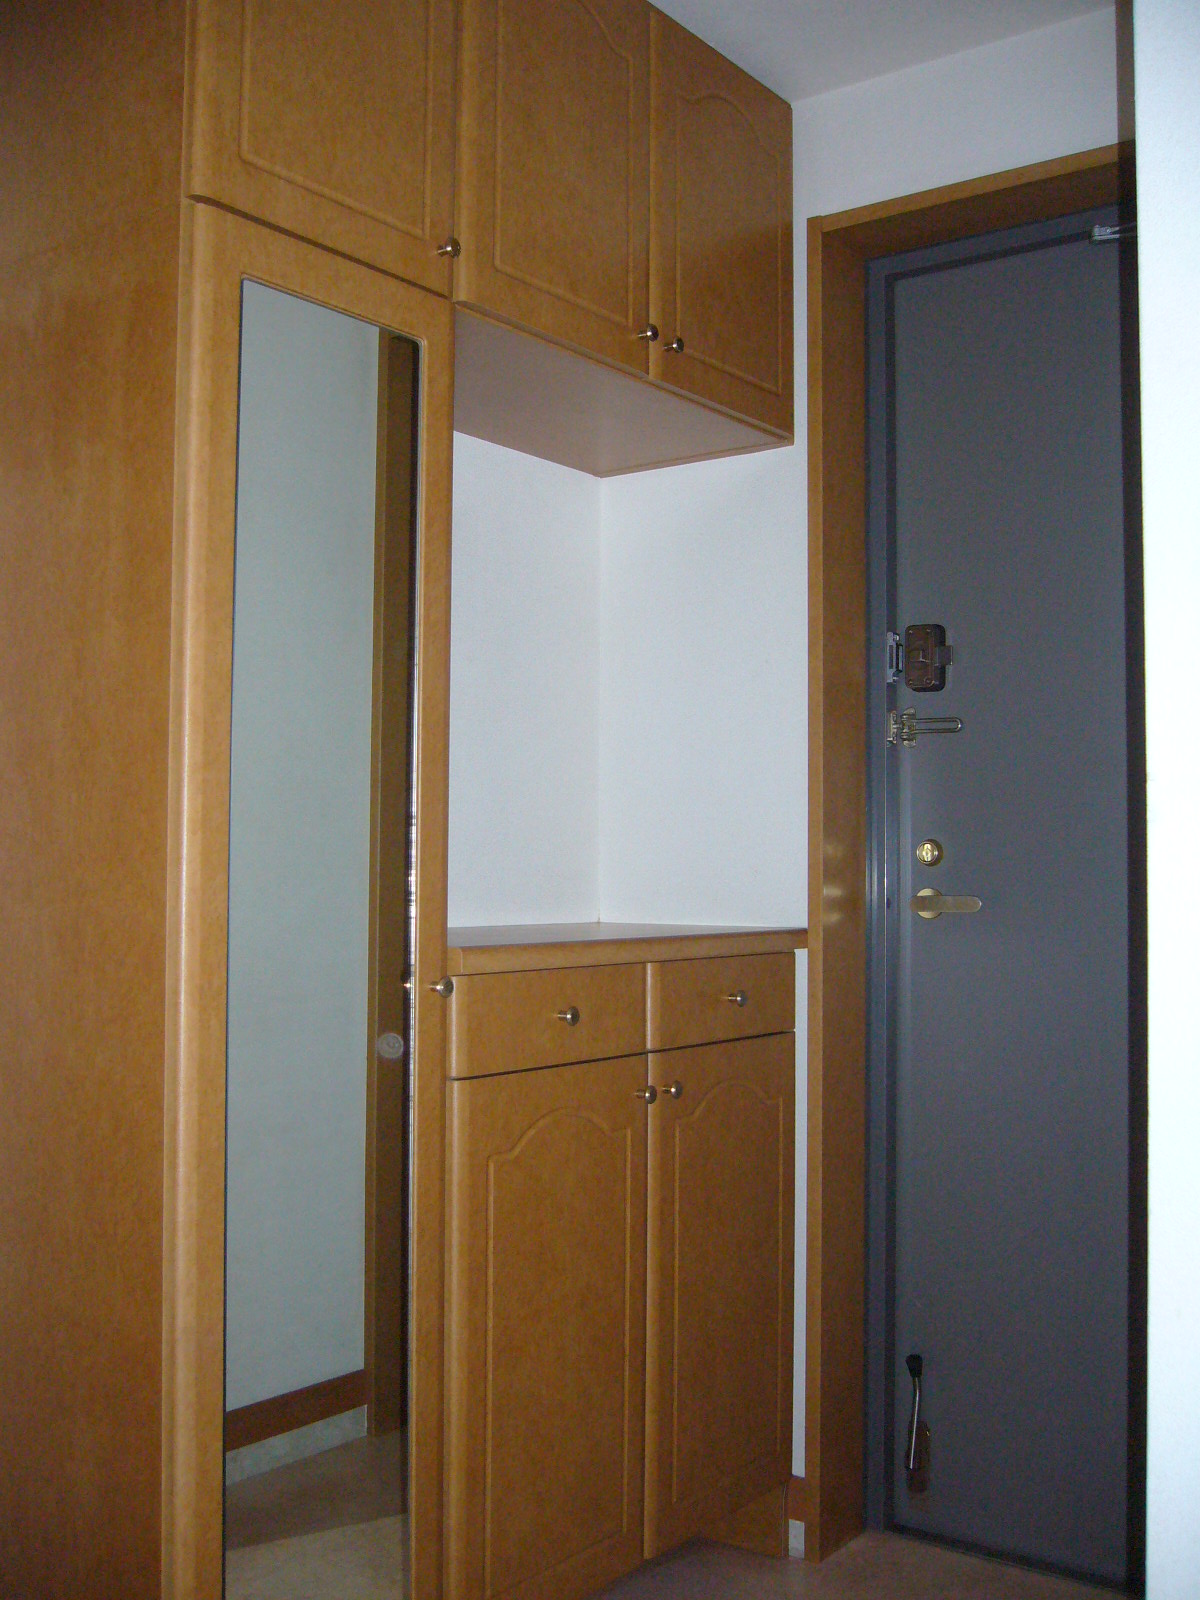 Entrance. Full-length mirror with shoe box